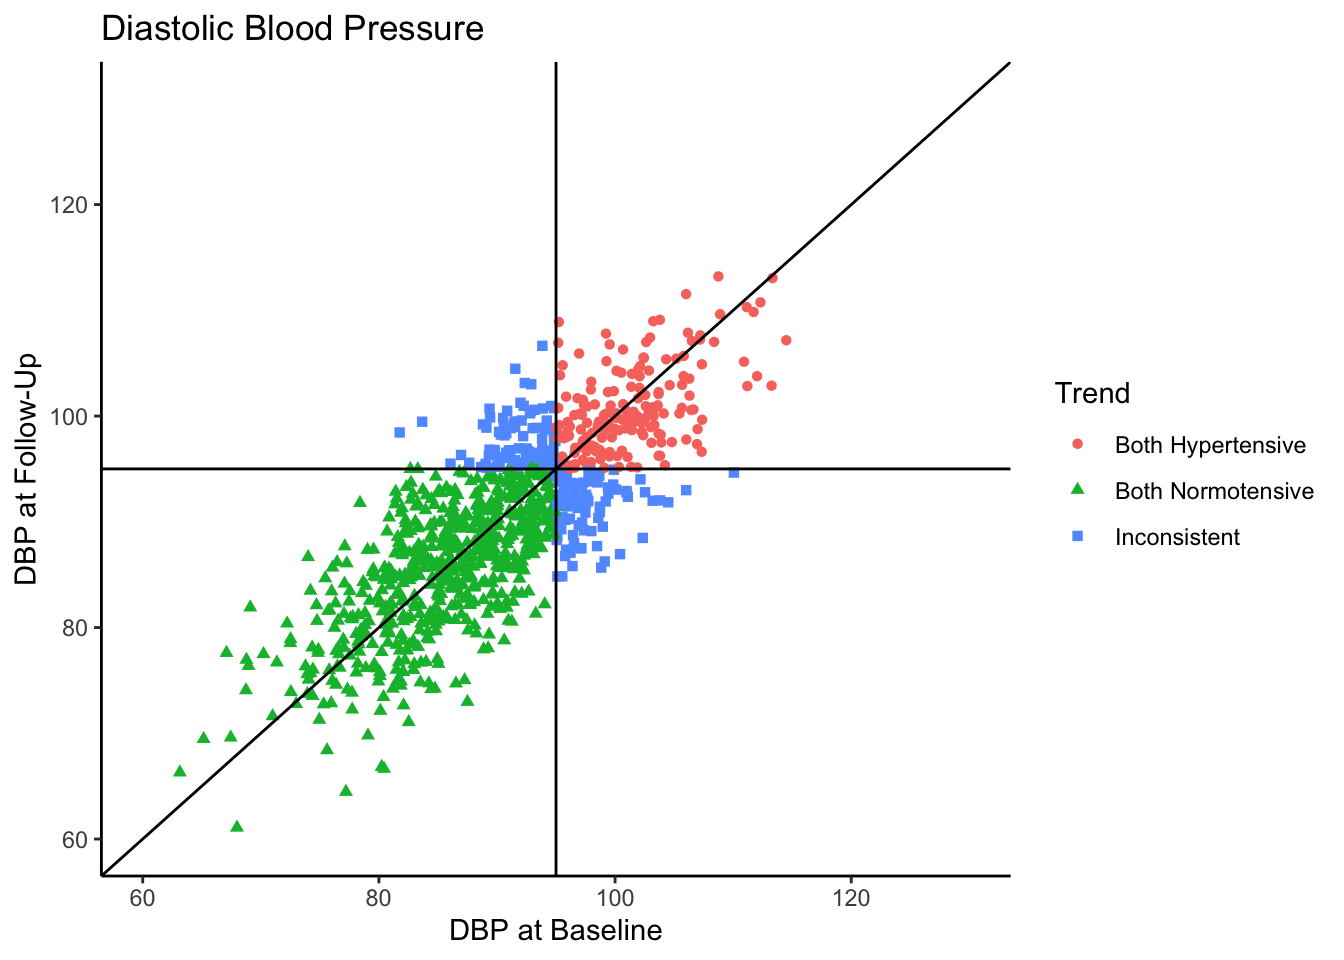 Scatterplot with DBP at Baseline as the x-axis and DBP at Follow-Up as the y-axis. Color-coded indicating Trend group assignment along with a vertical line representing the mean and a diagonal line with a slope of 1 and an intercept of 0.  More cases are shown to be Both Normotensive than Both Hypertensive.